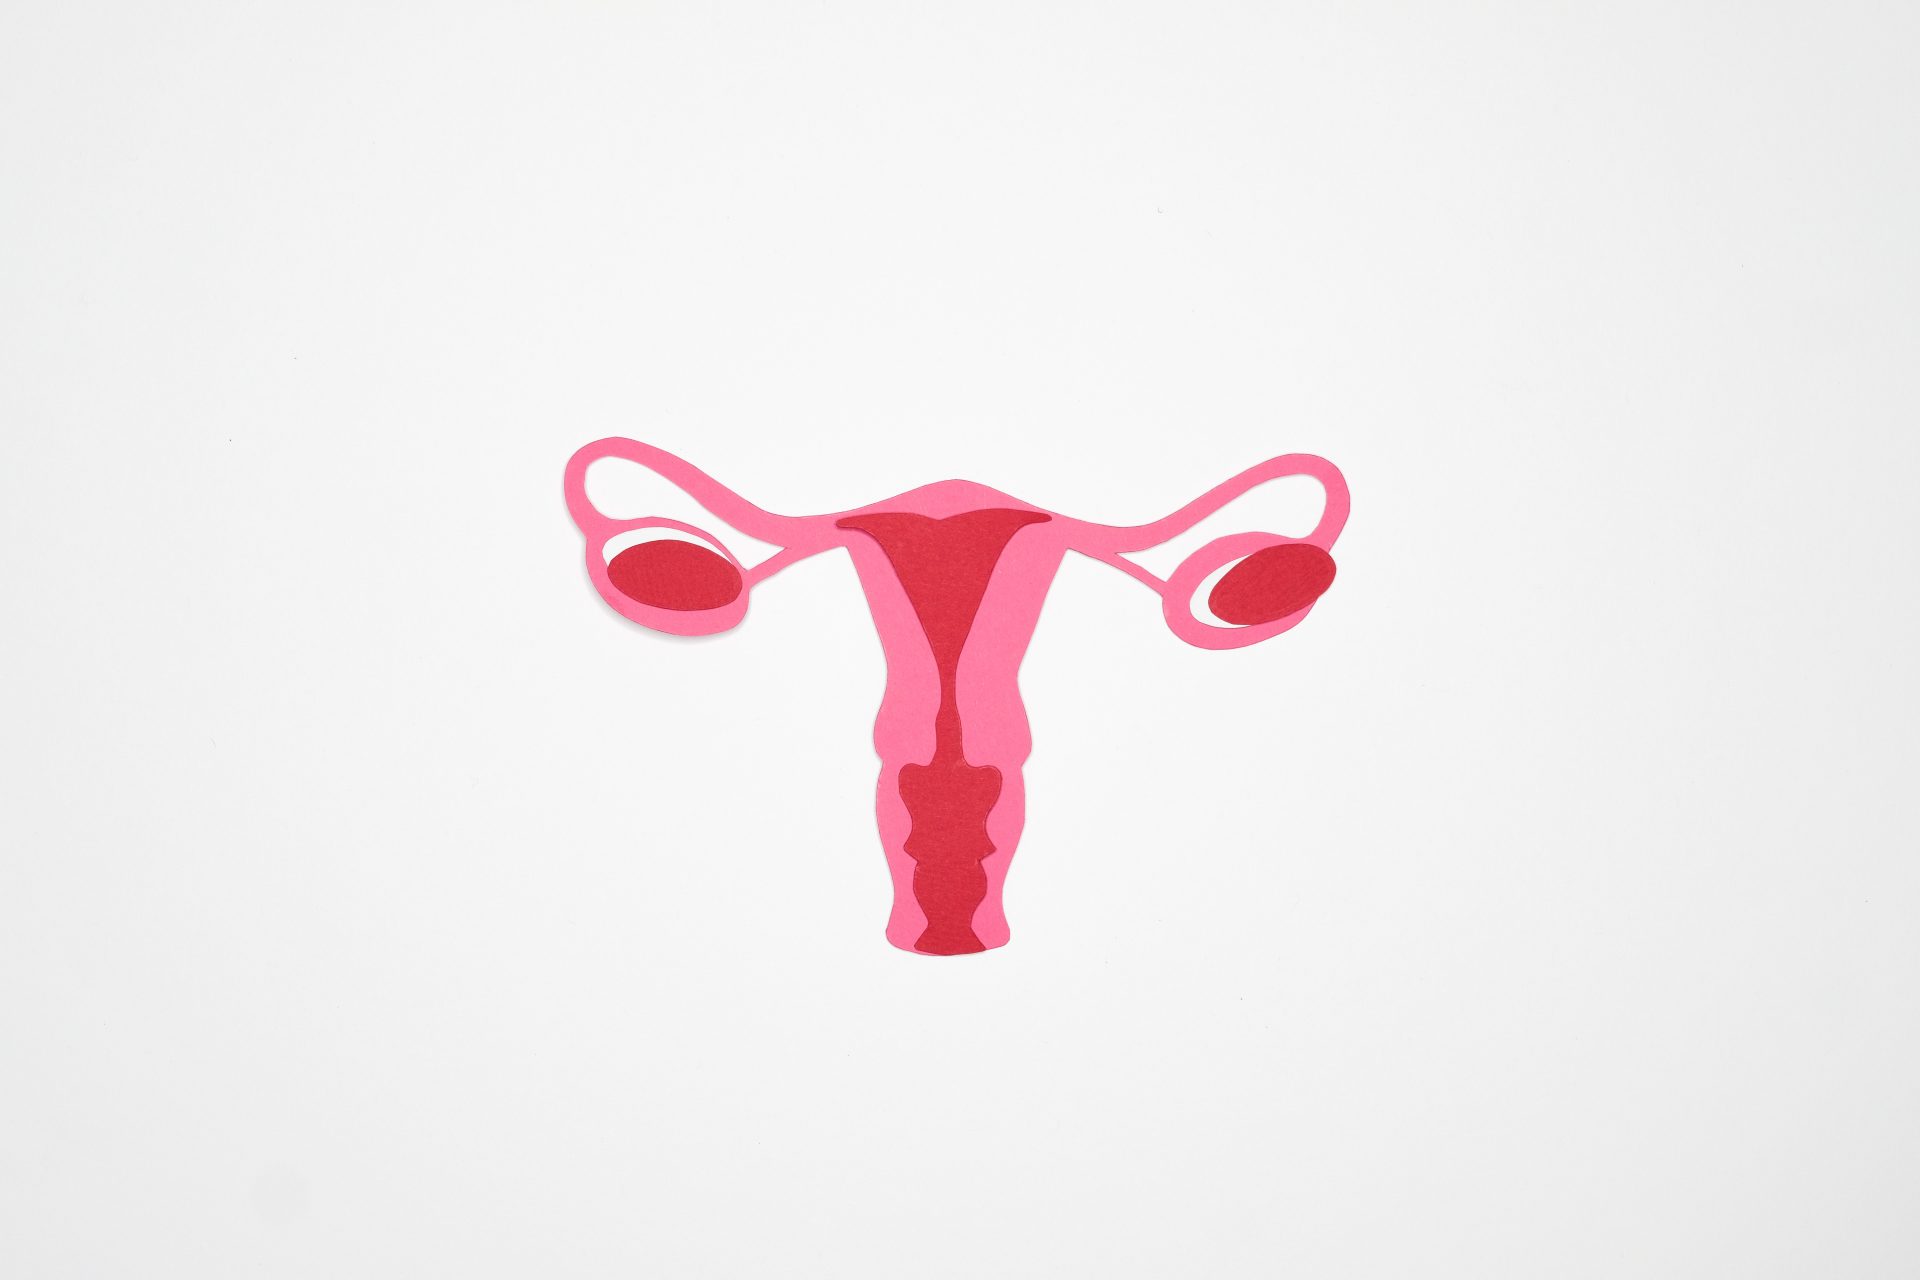 graphic art on a womans ovary